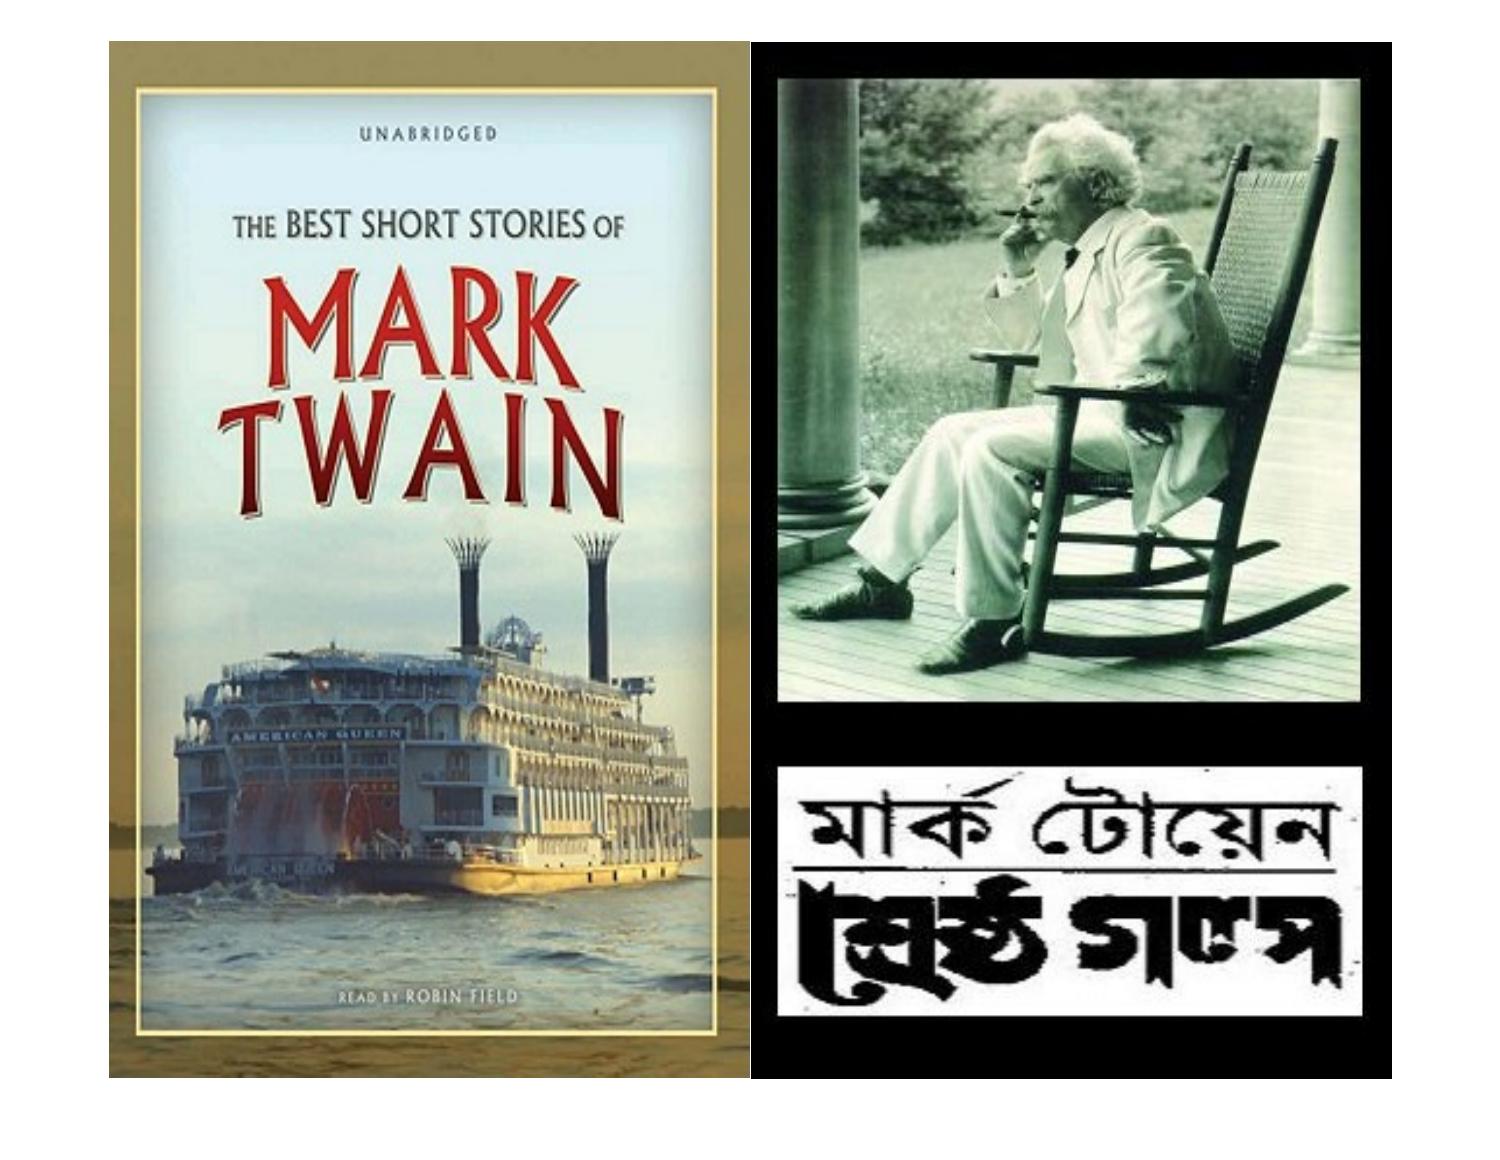 The Best Short Stories of Mark Twain by Mark Twain.pdf | DocDroid